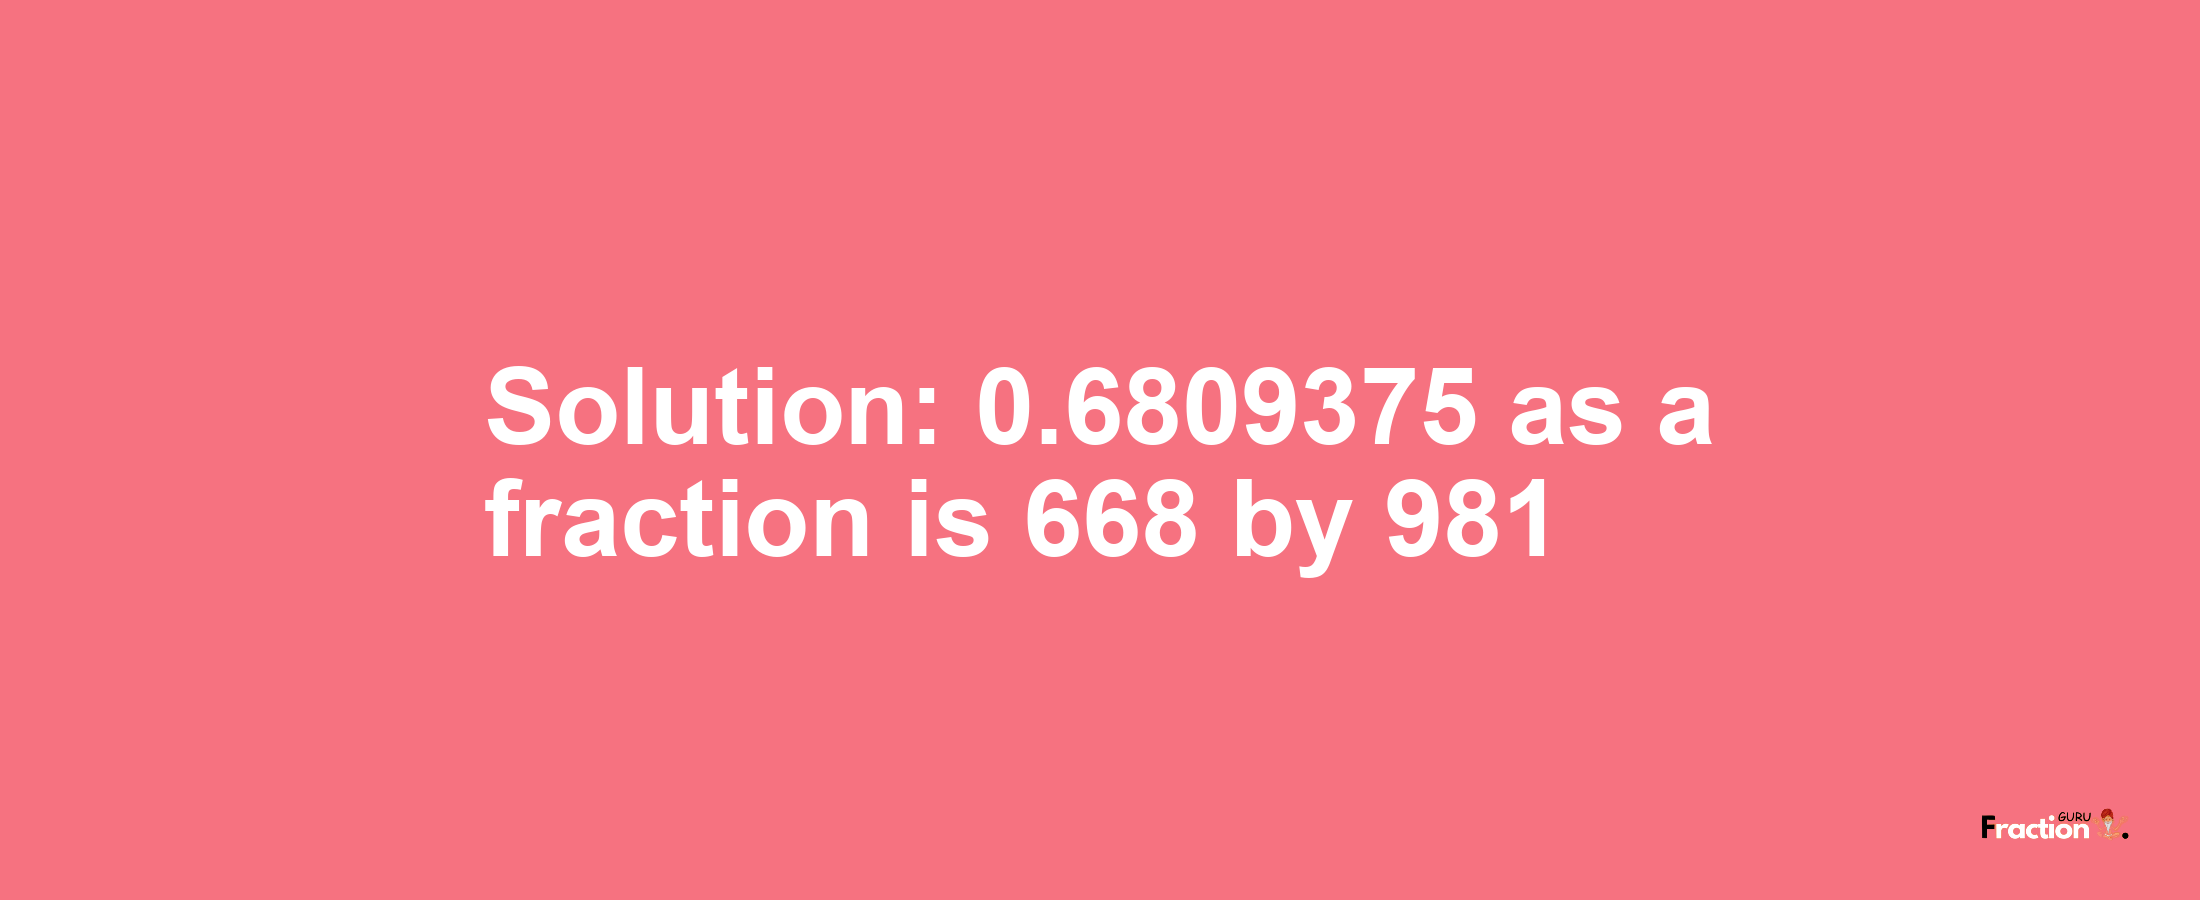 Solution:0.6809375 as a fraction is 668/981